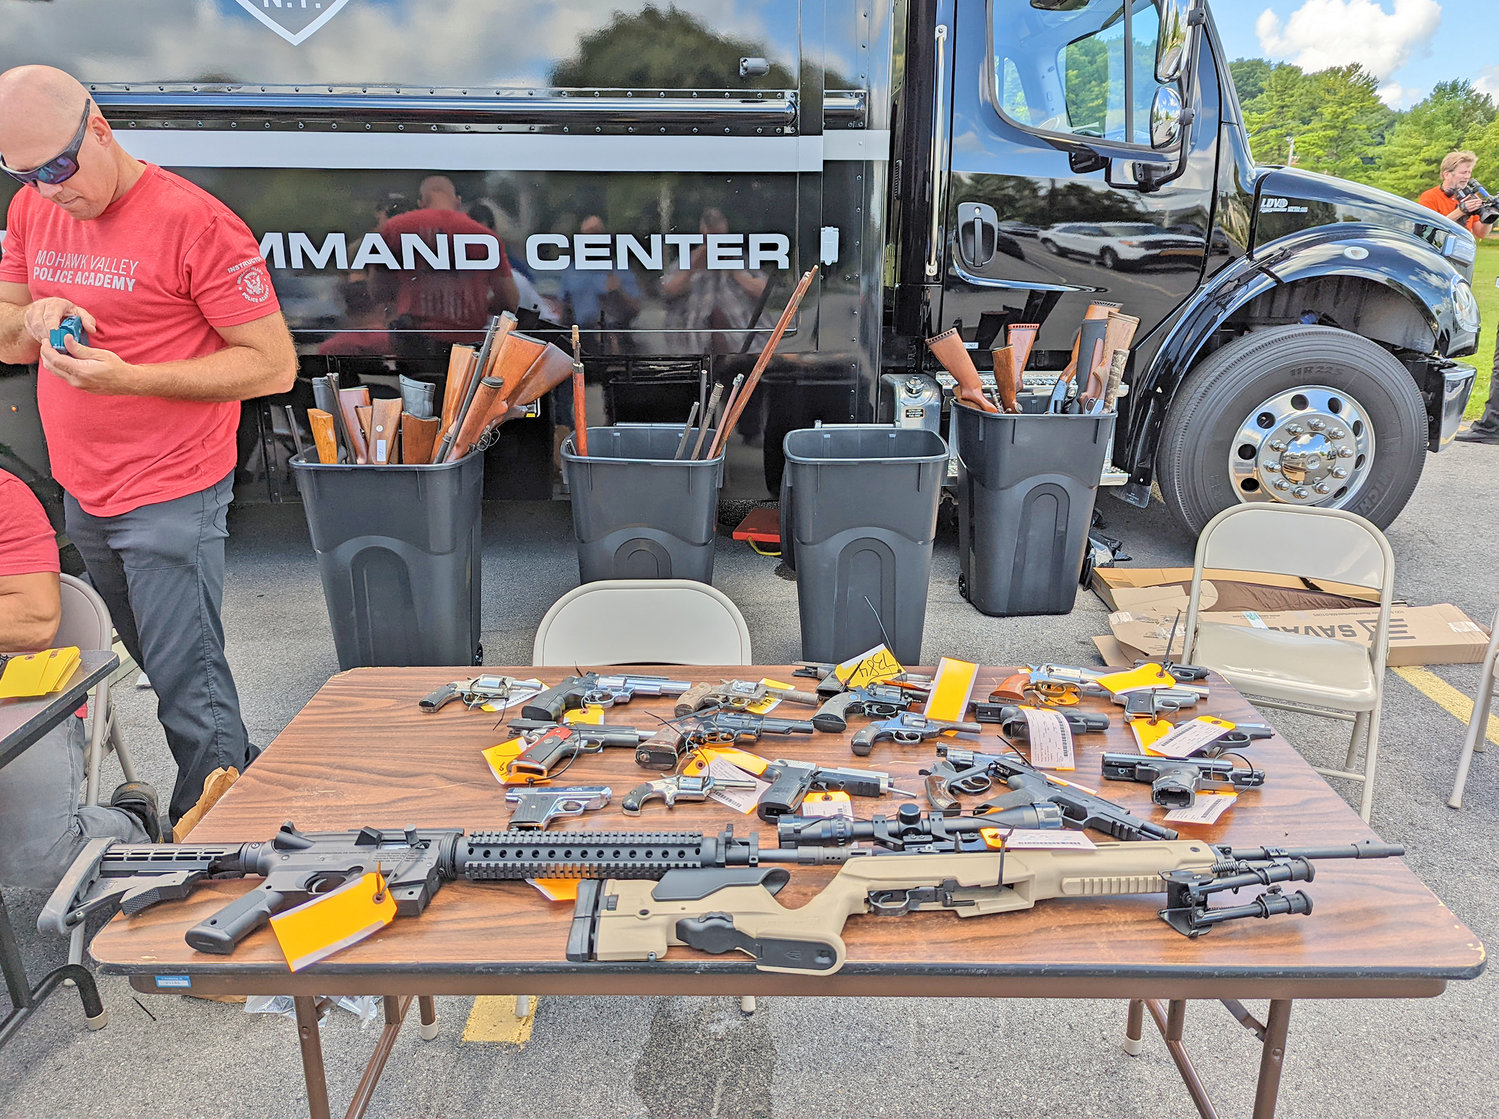 Assault rifles, hunting riffles, handguns and more were traded in for gift cards at the gun buyback event in Utica on Saturday, hosted by the New York State Attorney General’s Office.